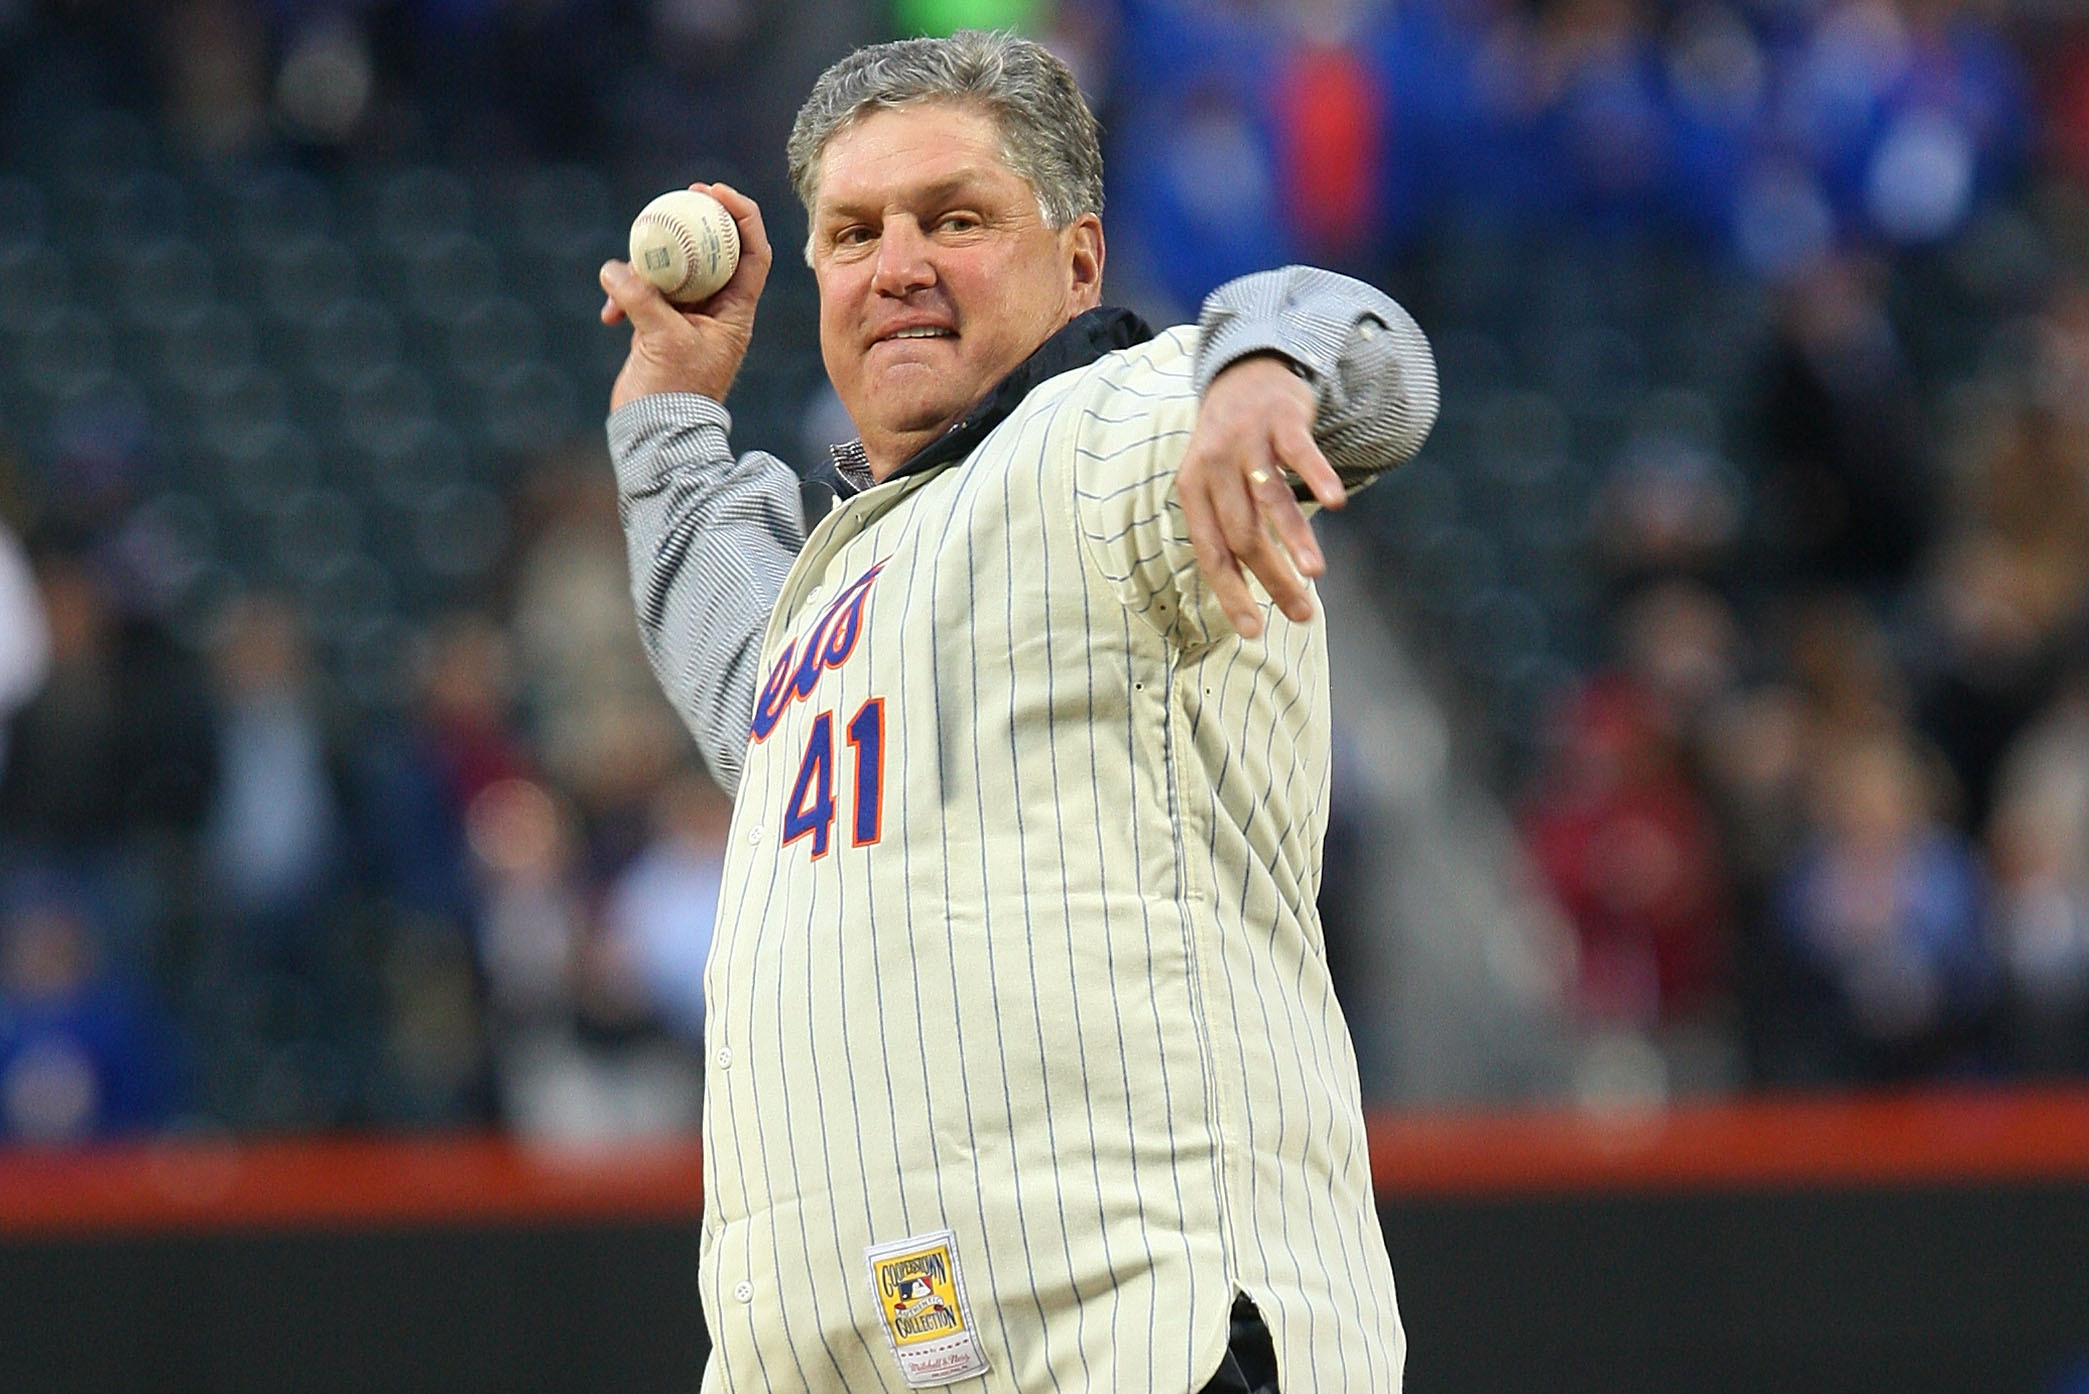 Mets All-Time Great Tom Seaver Diagnosed with Dementia - WENY News